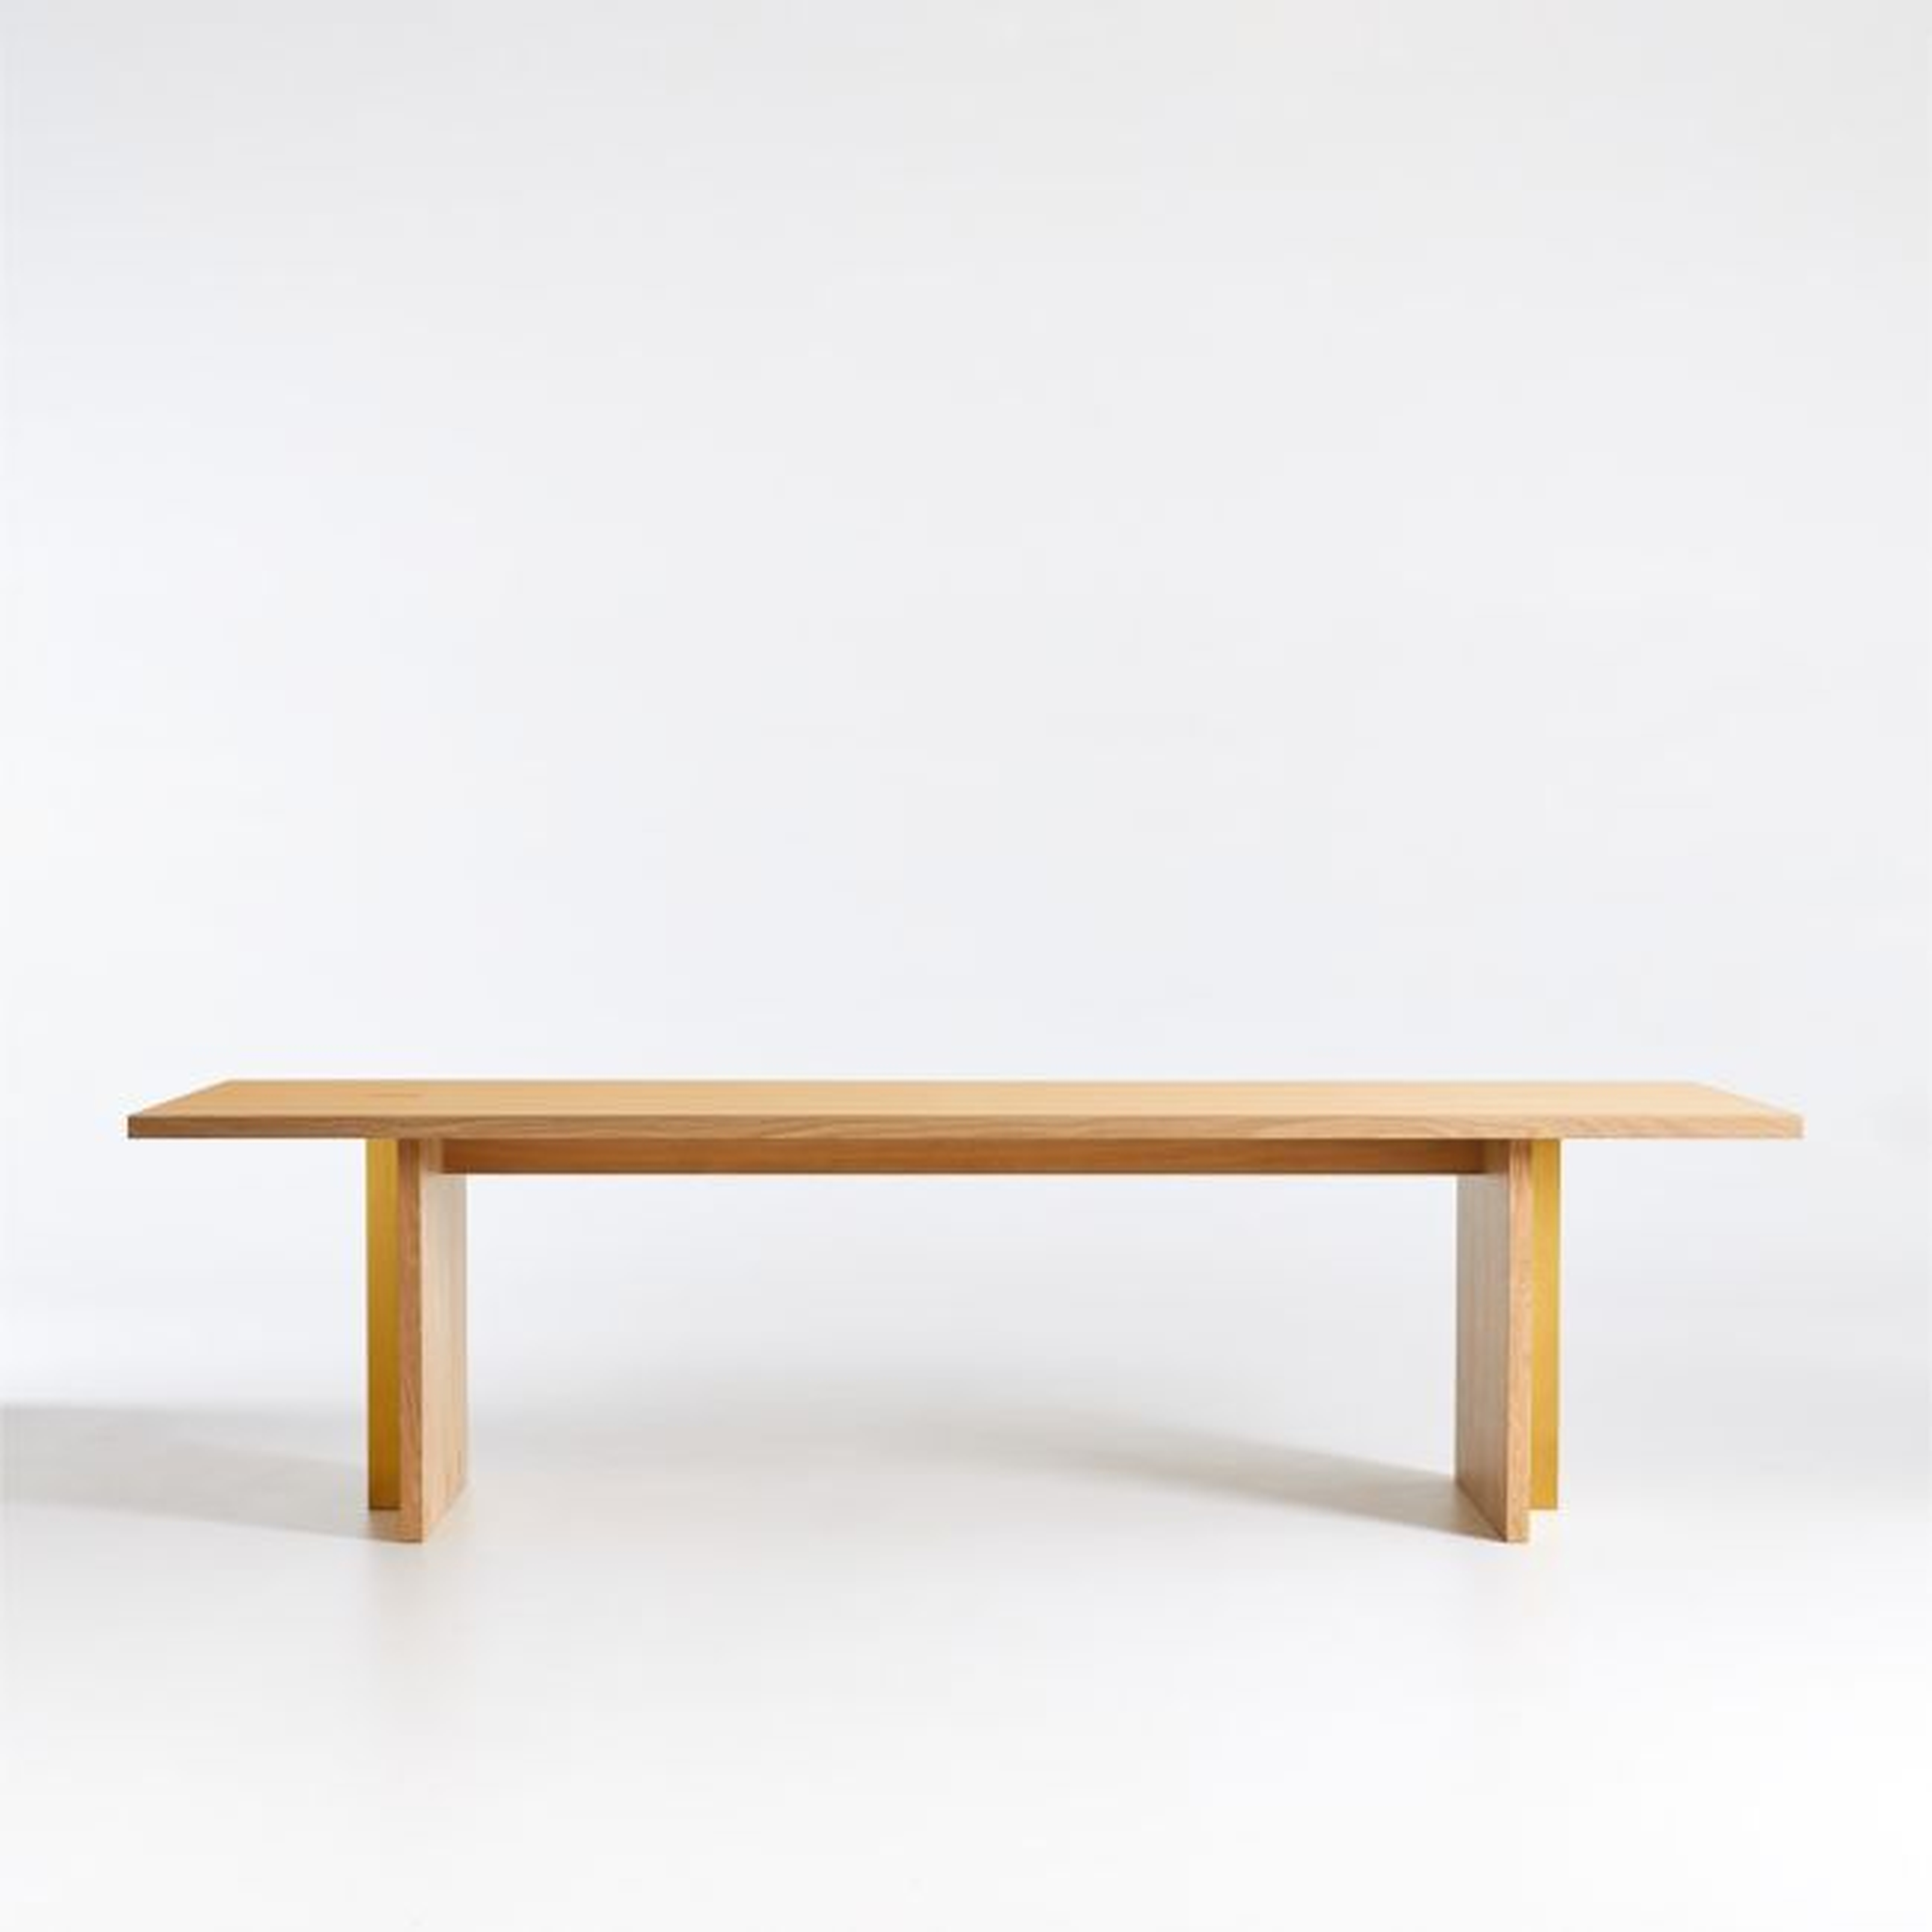 Paradox 109" Natural Oak Dining Table - Crate and Barrel